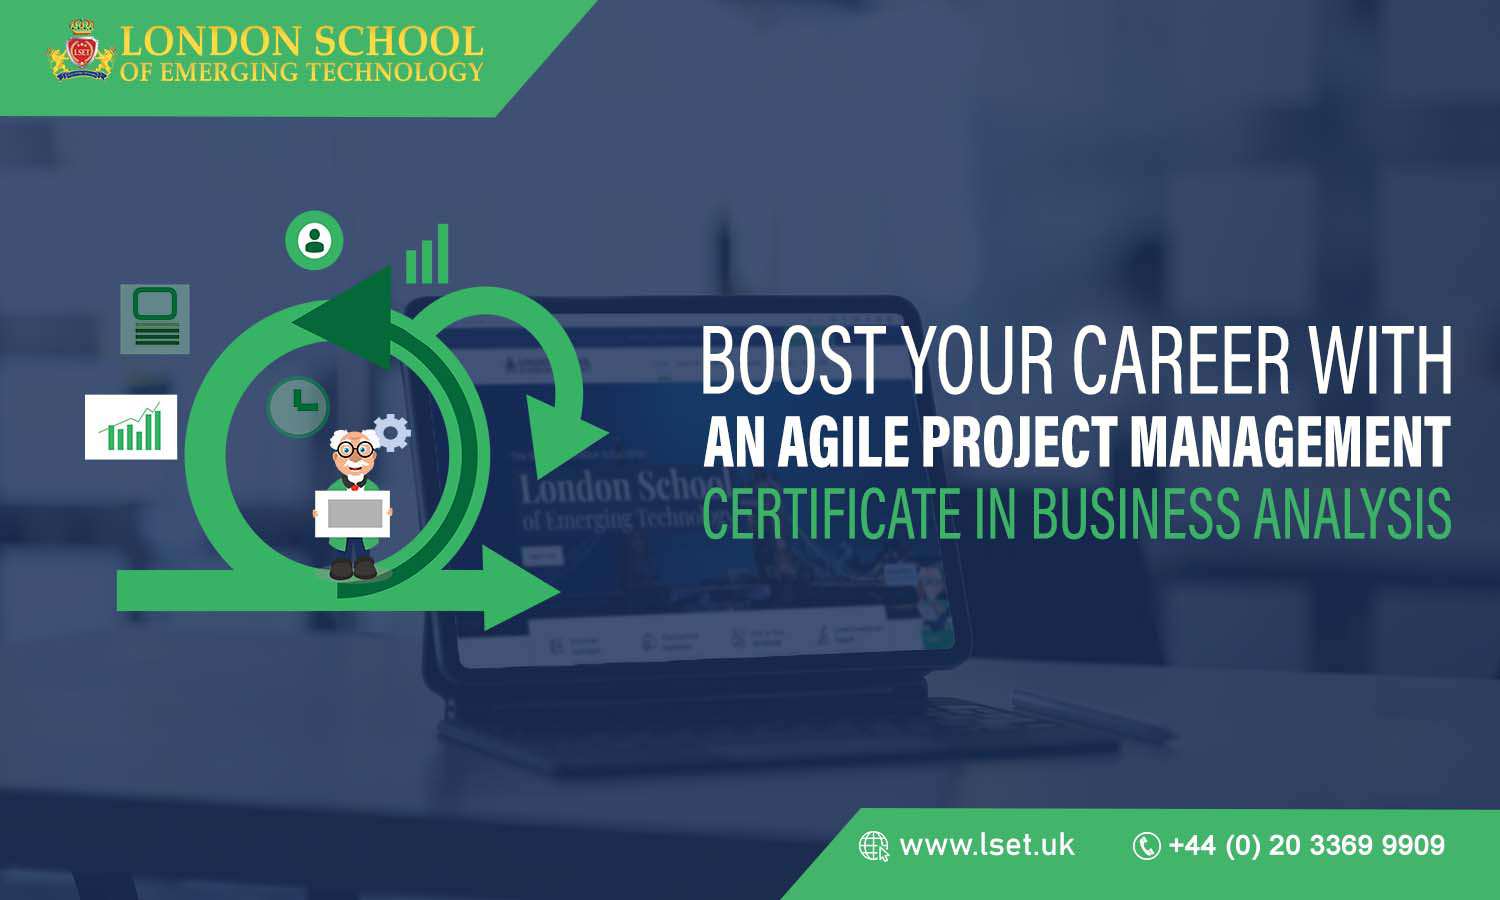 Boost Your Career With an Agile Project Management Certificate in Business Analysis